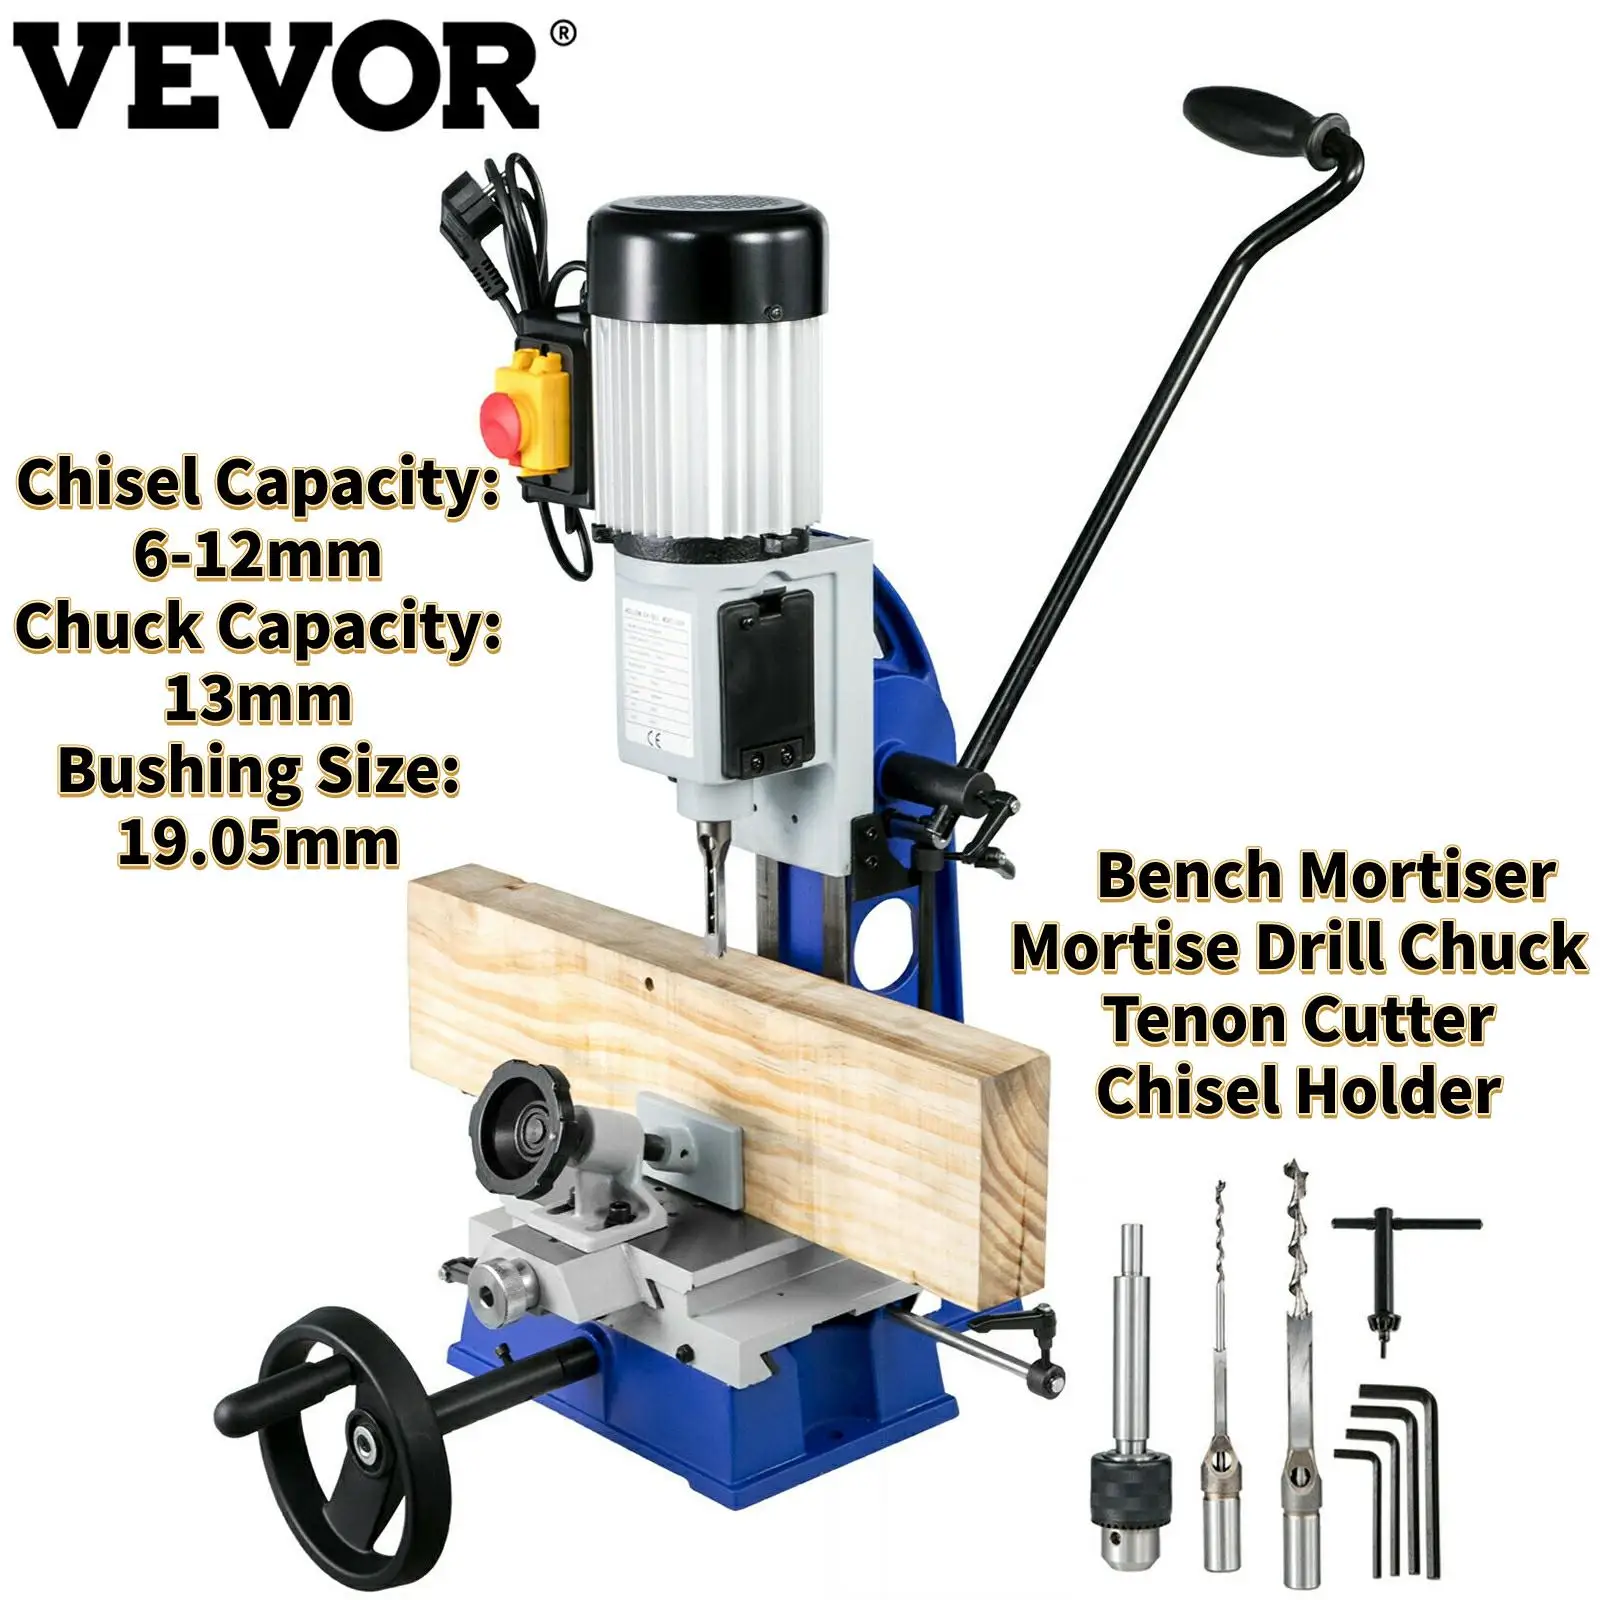 

VEVOR Multi-Purpose Benchtop Mortise Machine for Woodworking Metalworking Drilling with Drill Chuck, Tenon Cutter, Chisel Holder